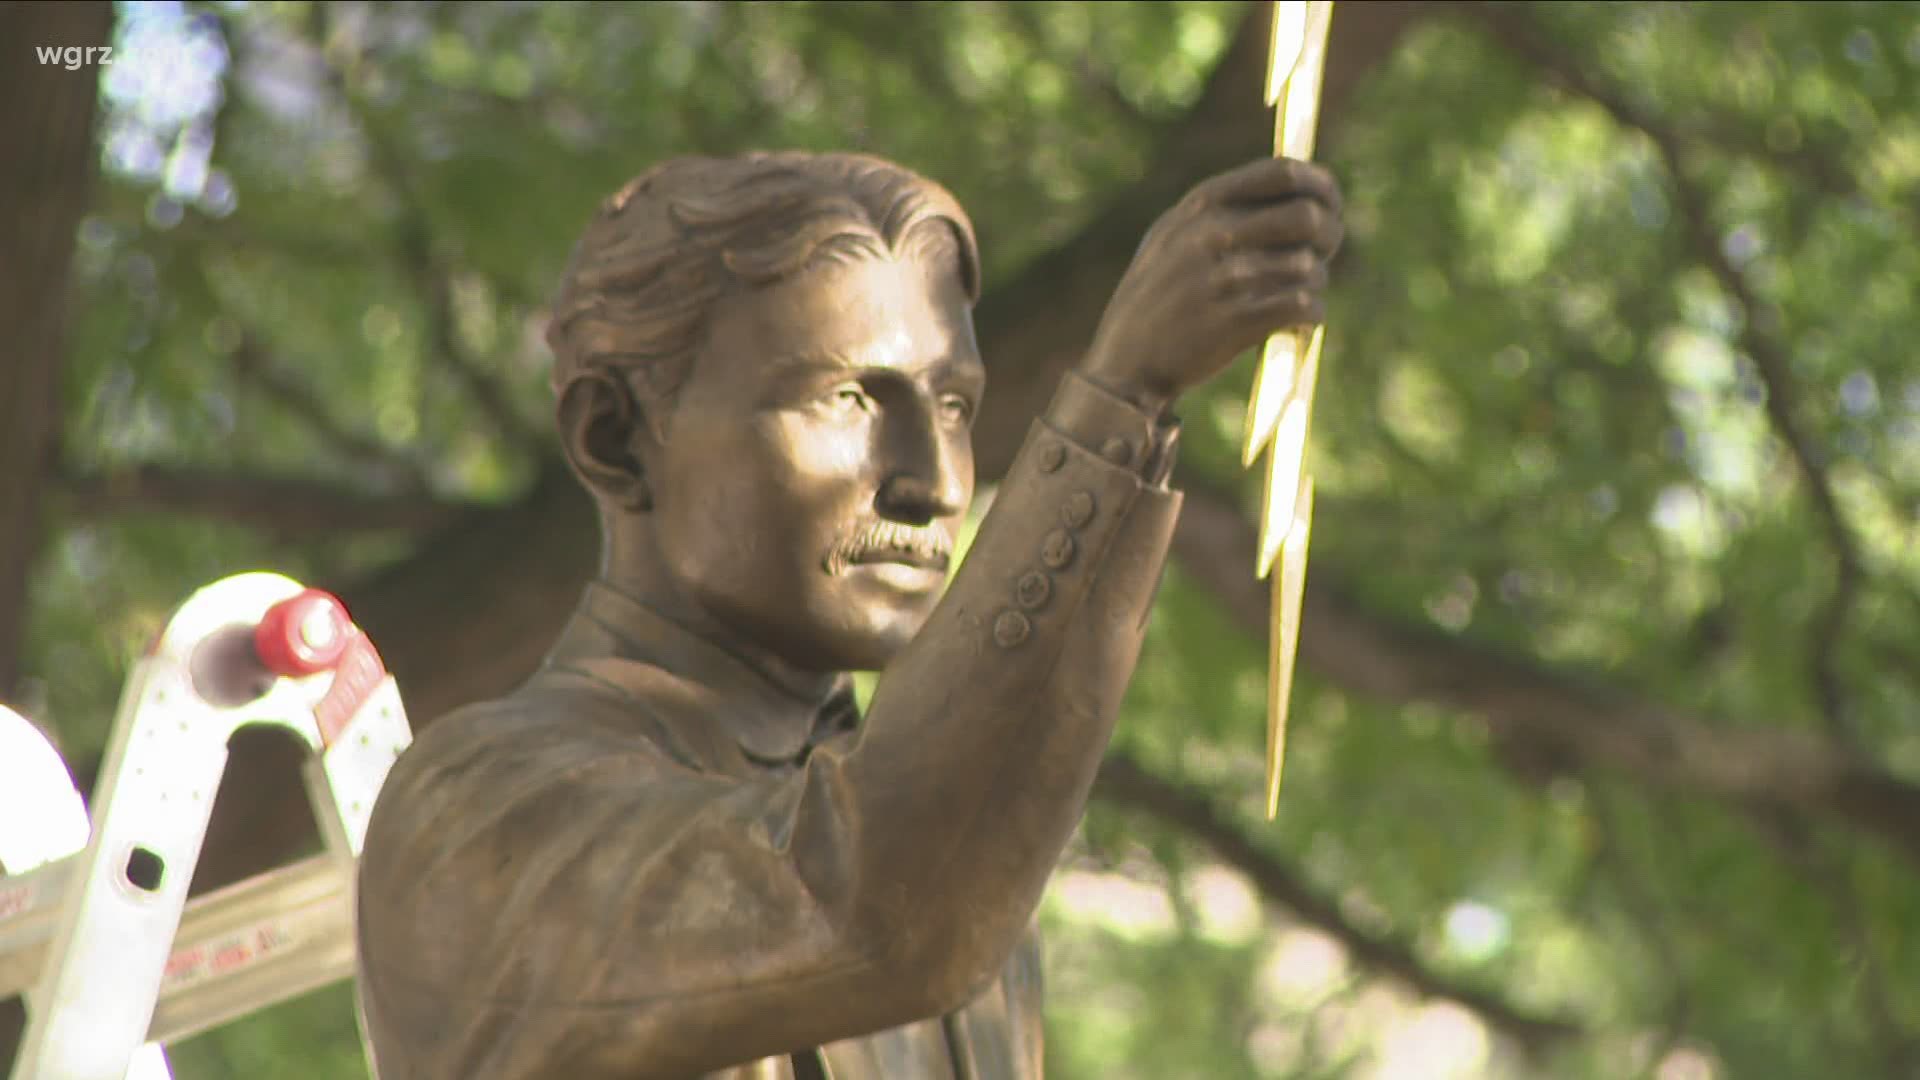 The statue is at the corner of Main and North Division streets, in a pot that will soon be named Nikola Tesla Park.